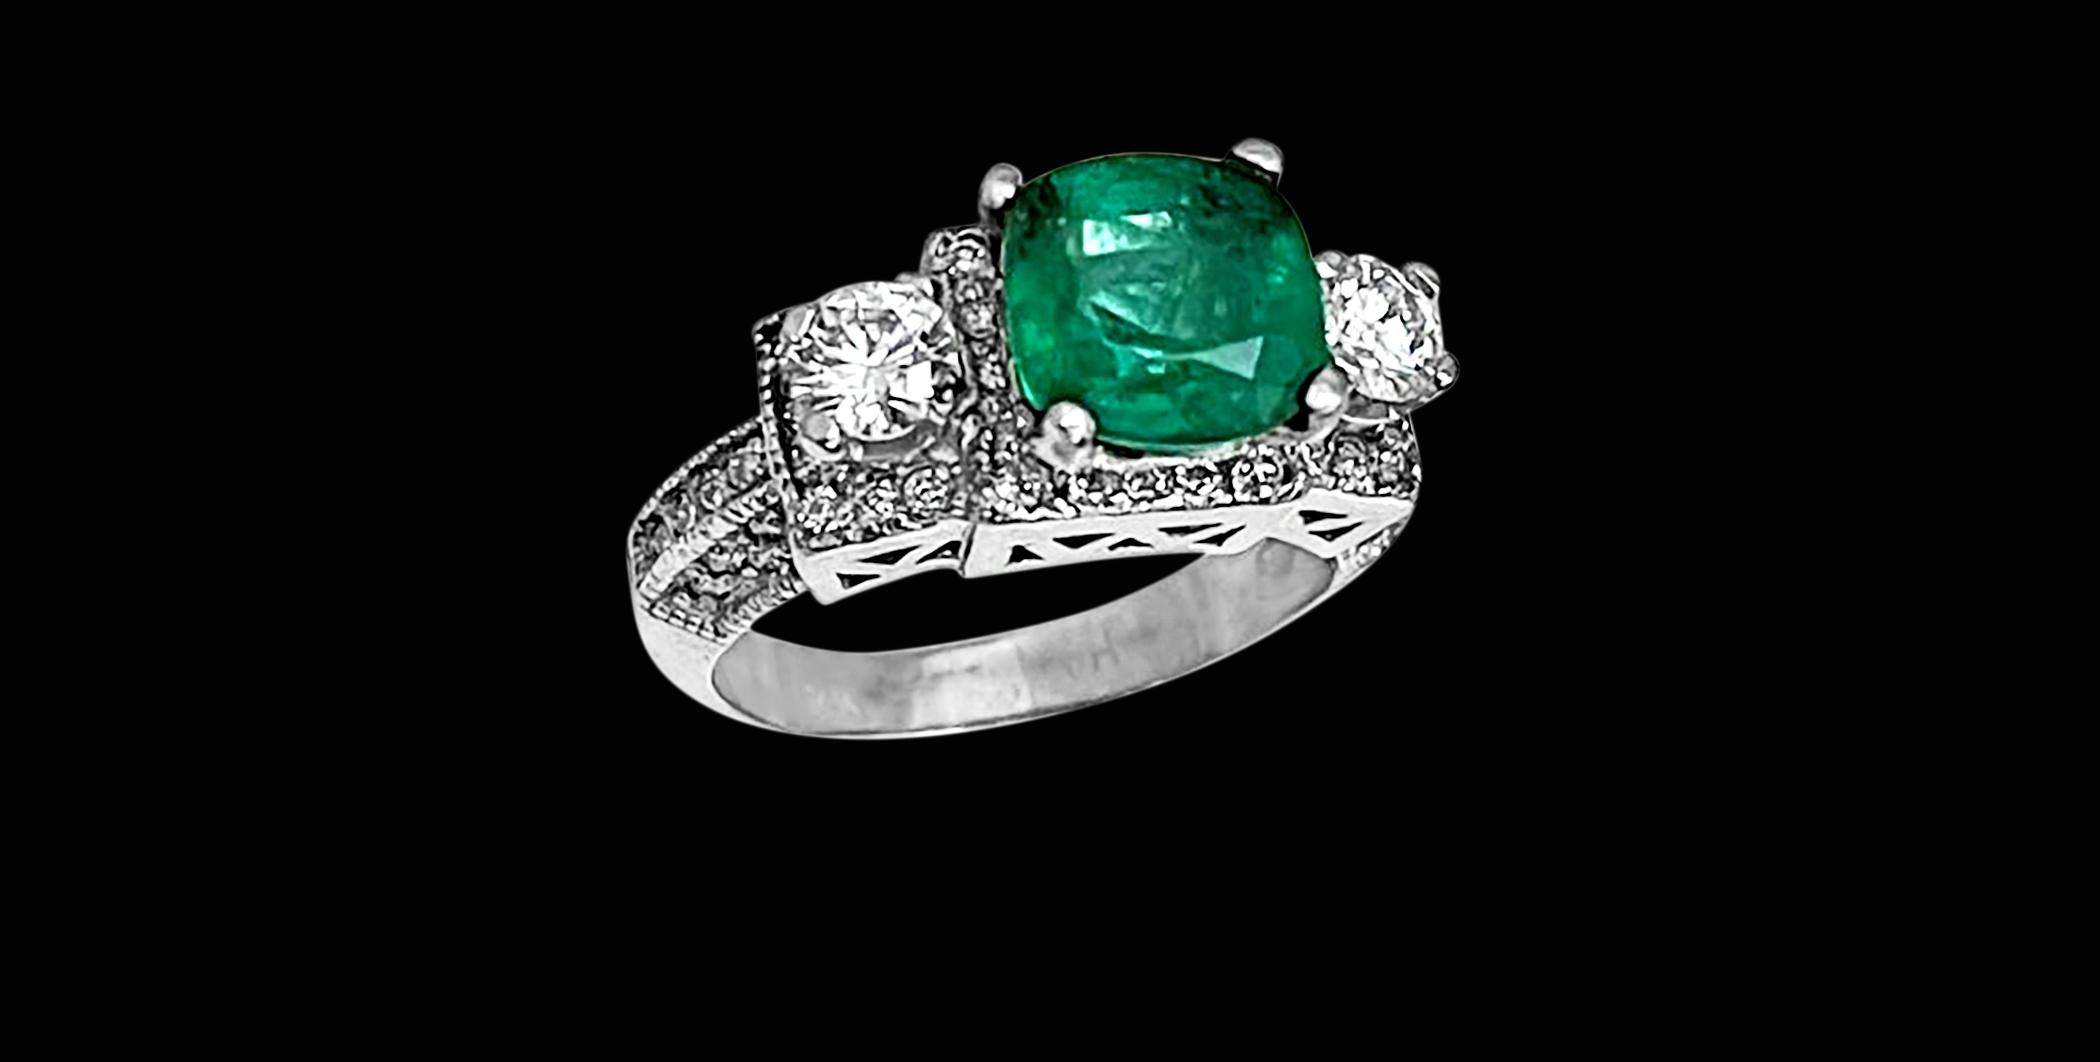 A classic, Cocktail ring 
 2 Carat Natural Cushion Cut Emerald & Diamond Ring 14 Karat White Gold Size 6
Intense green color, Beautiful stone with shine and luster  but has small  inclusions as all natural emeralds have inclusions.  
They have black